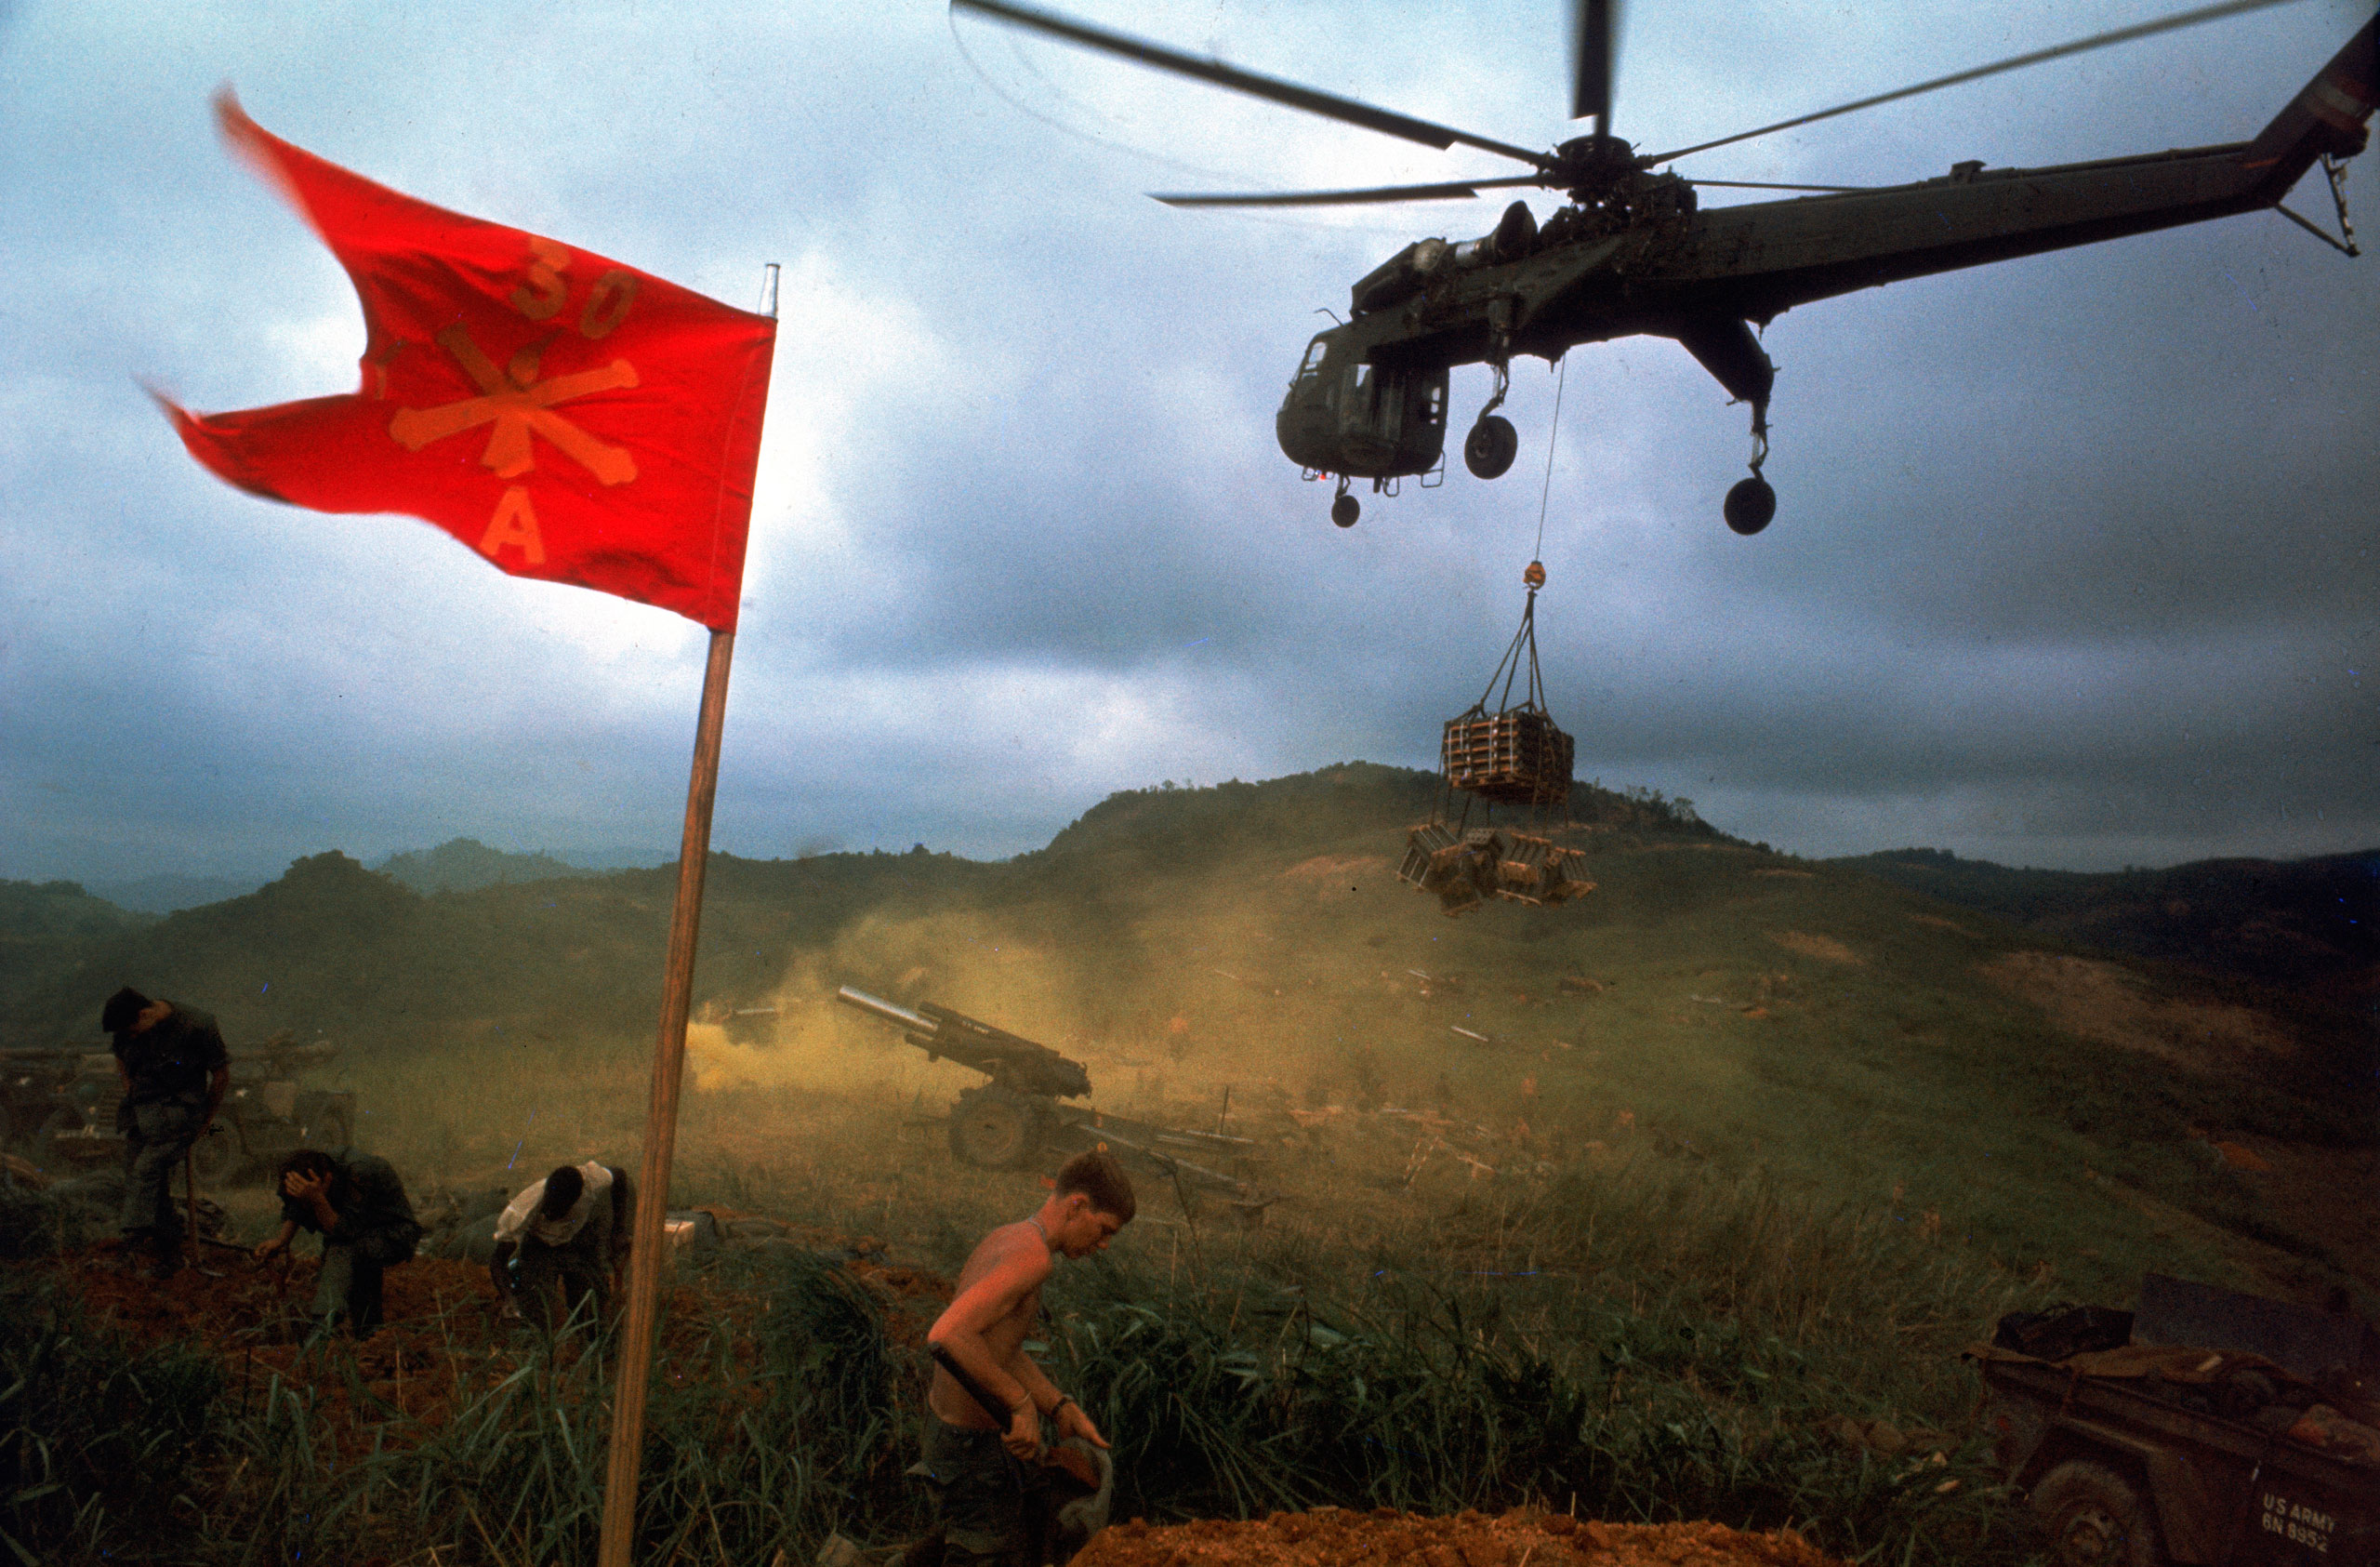 An American 1st Air Cavalry helicopter airlifts supplies into a Marine outpost during Operation Pegasus in Vietnam in 1968.